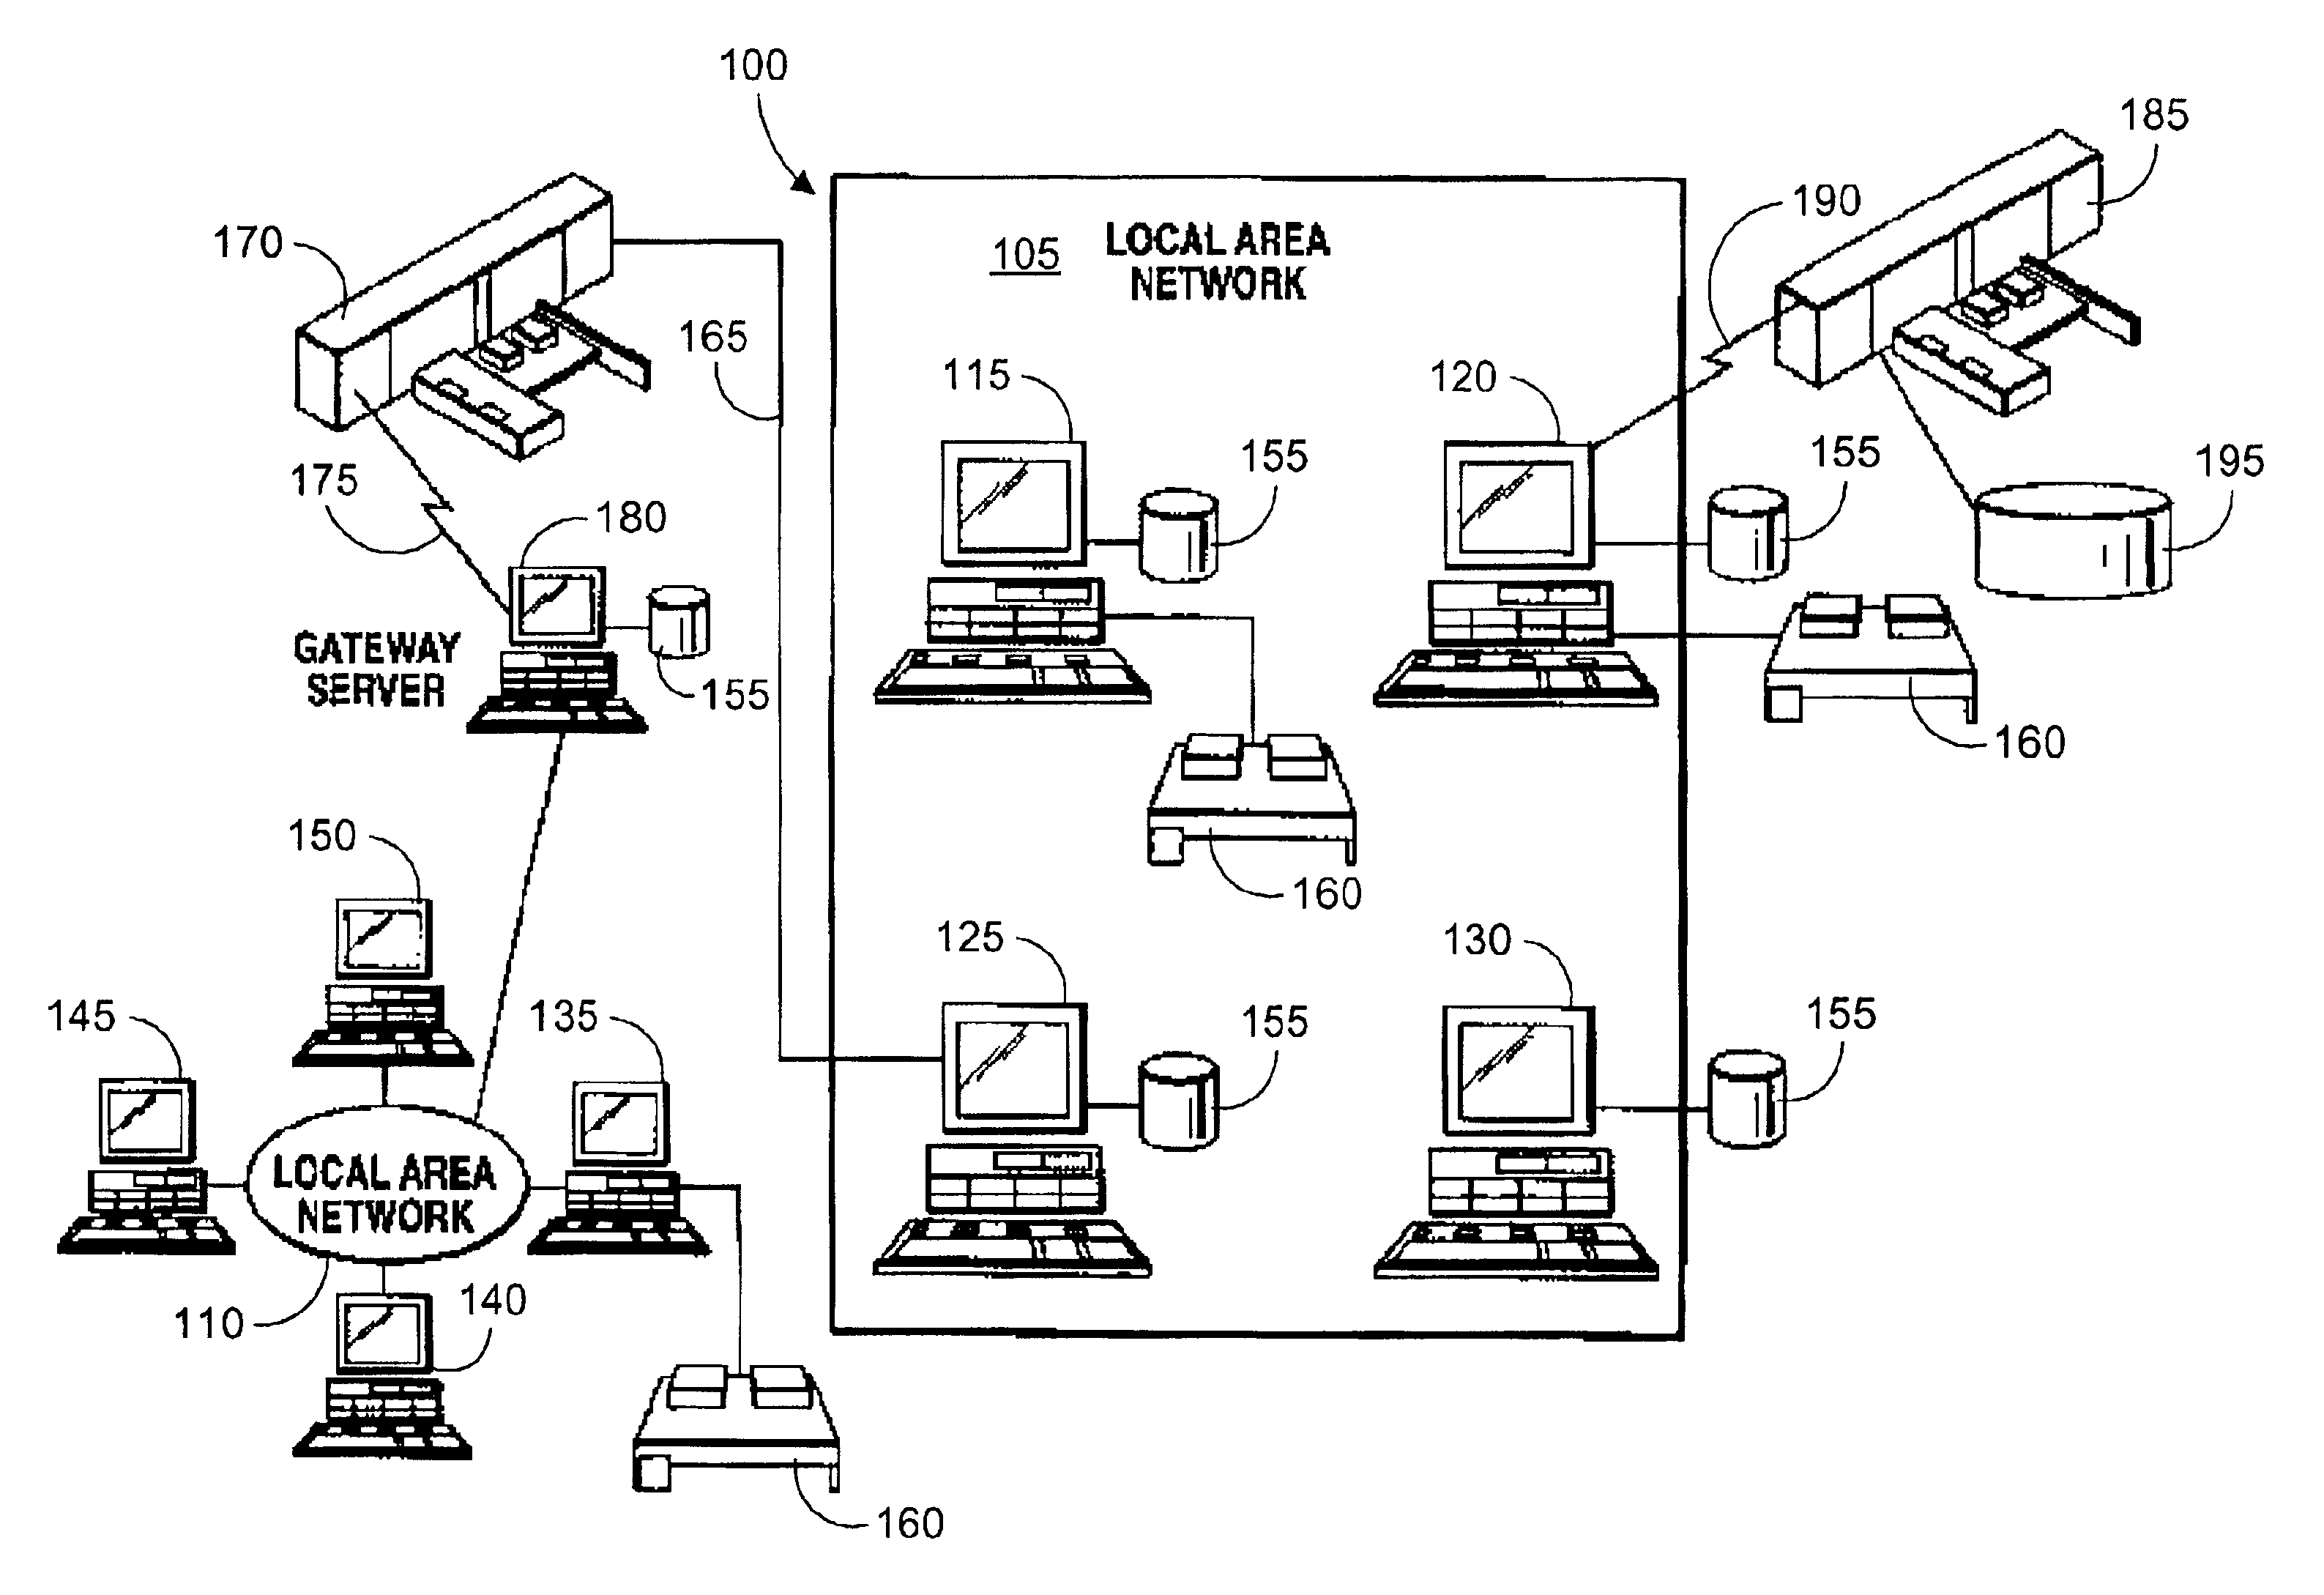 Method and system for creating and managing common and custom storage devices in a computer network